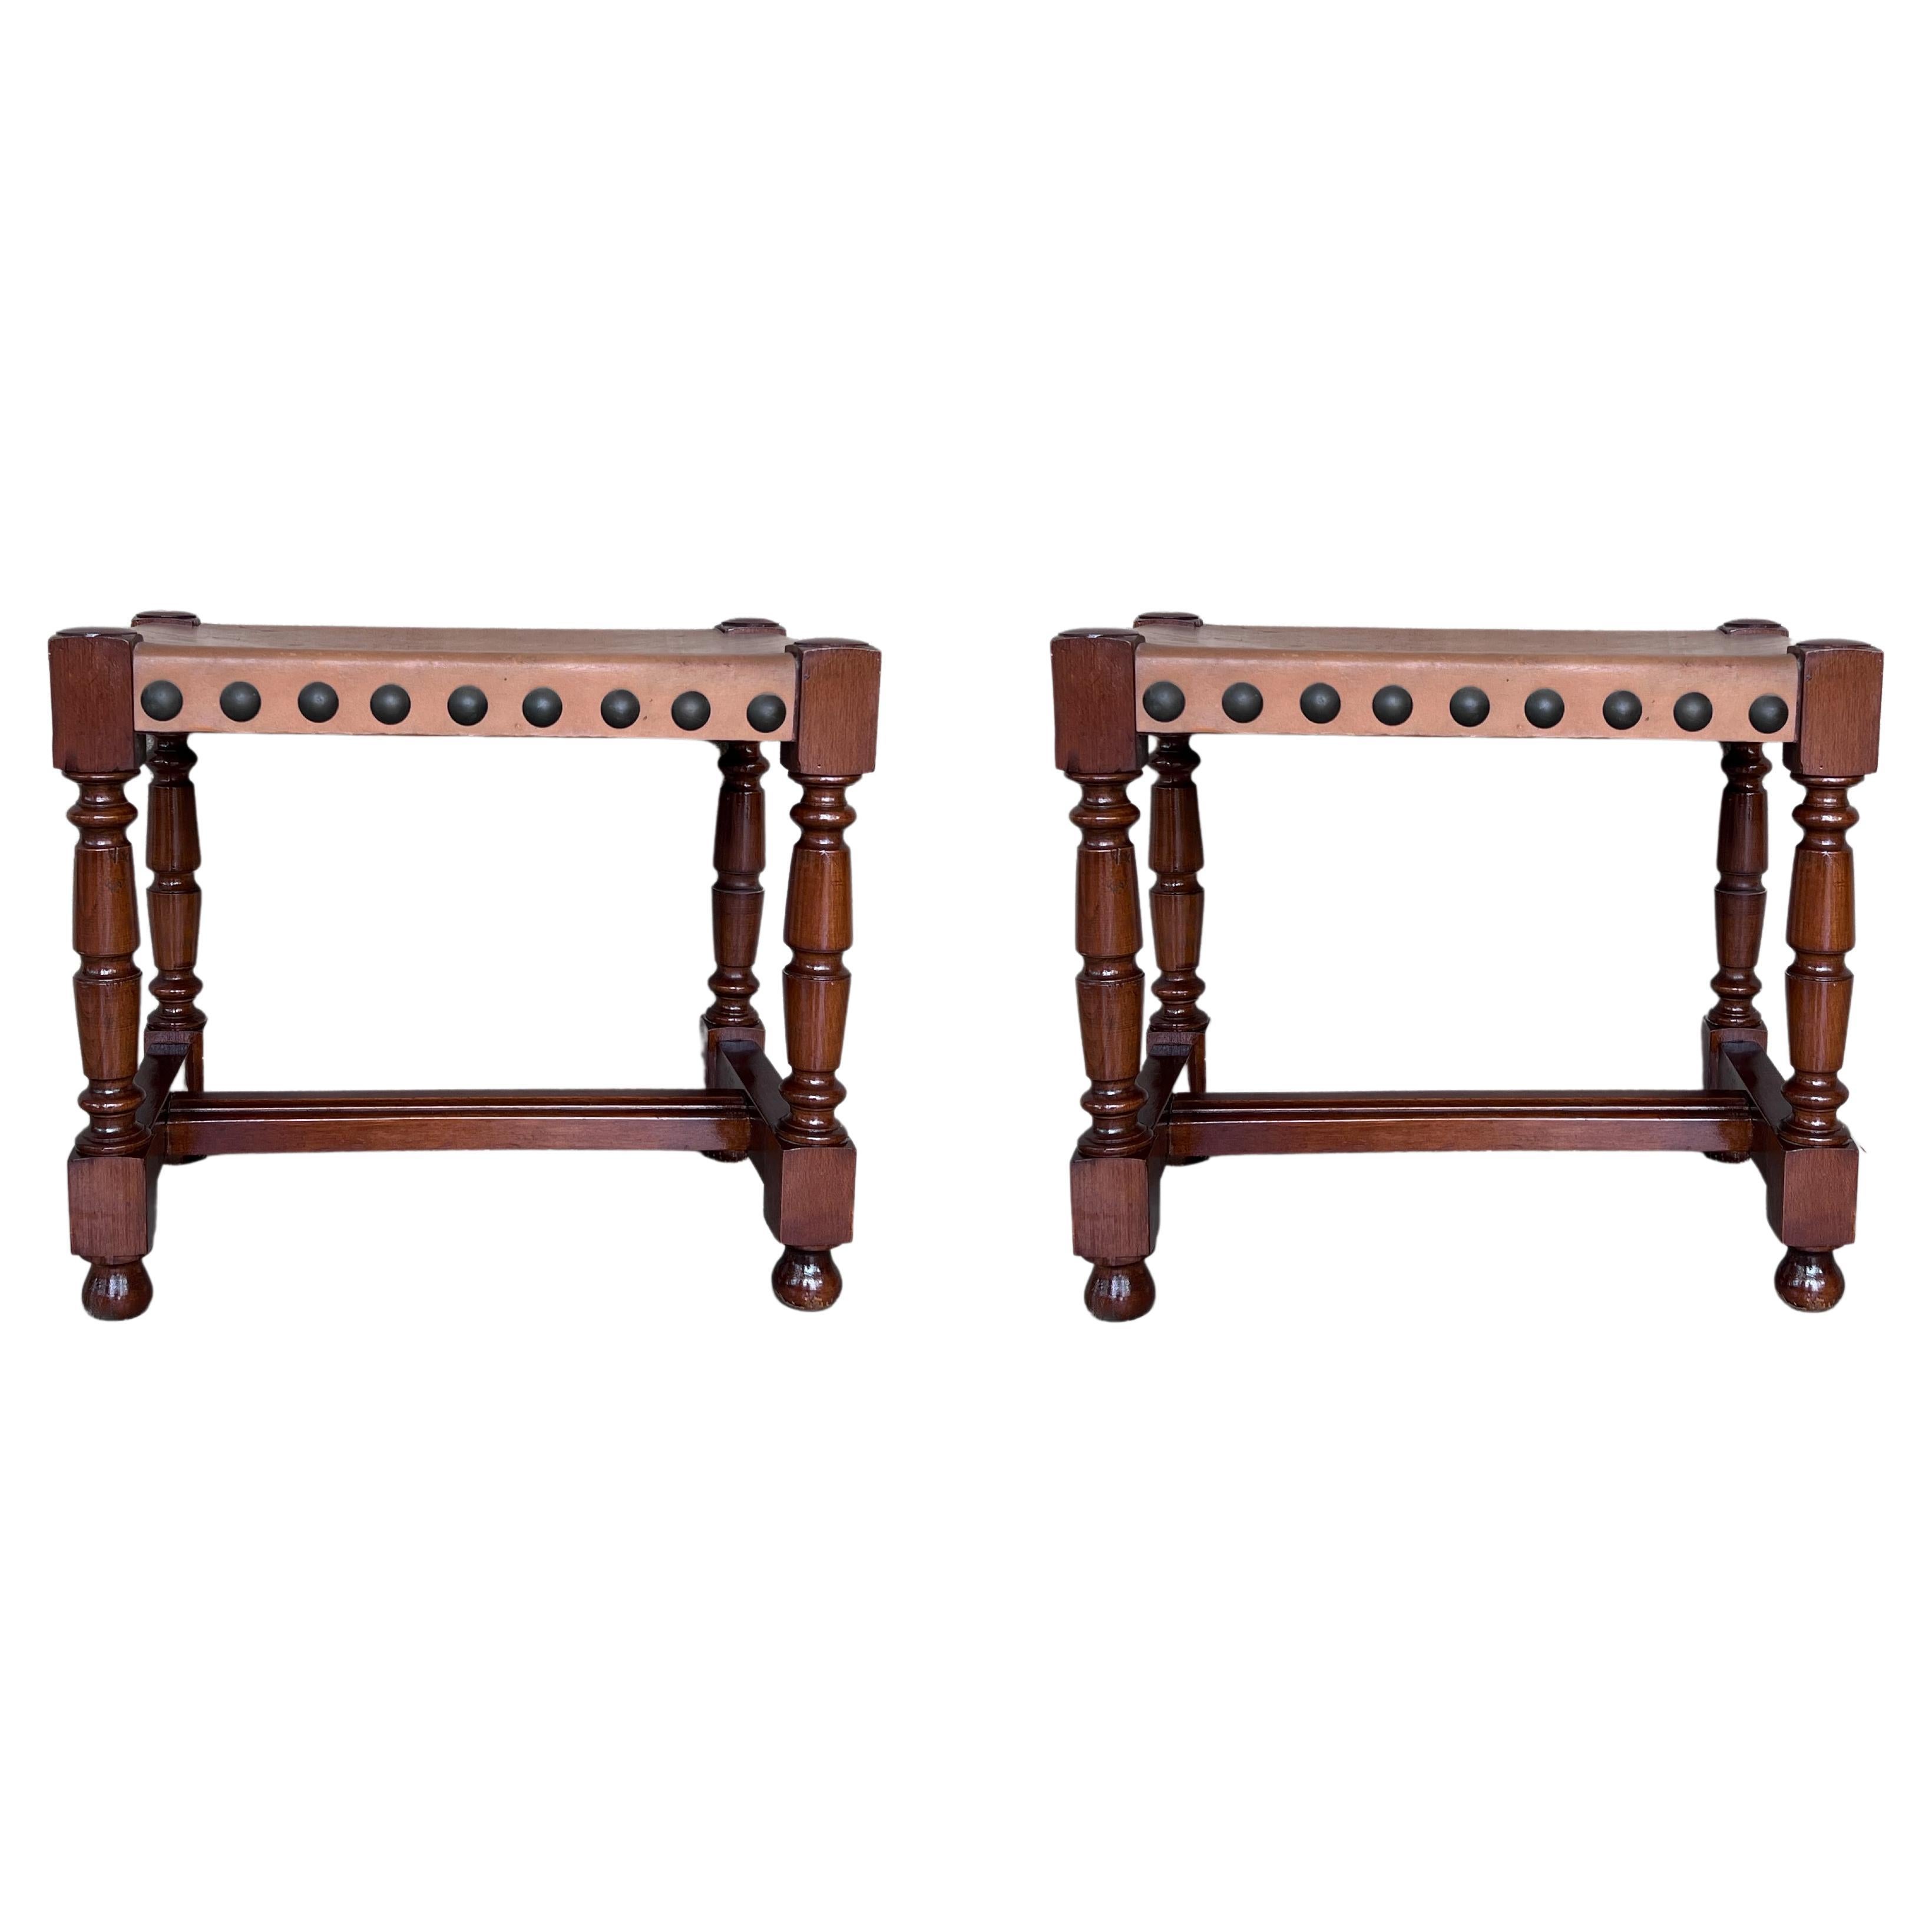 Pair of Foot Stools in Walnut and Leather Seat with Tacks For Sale